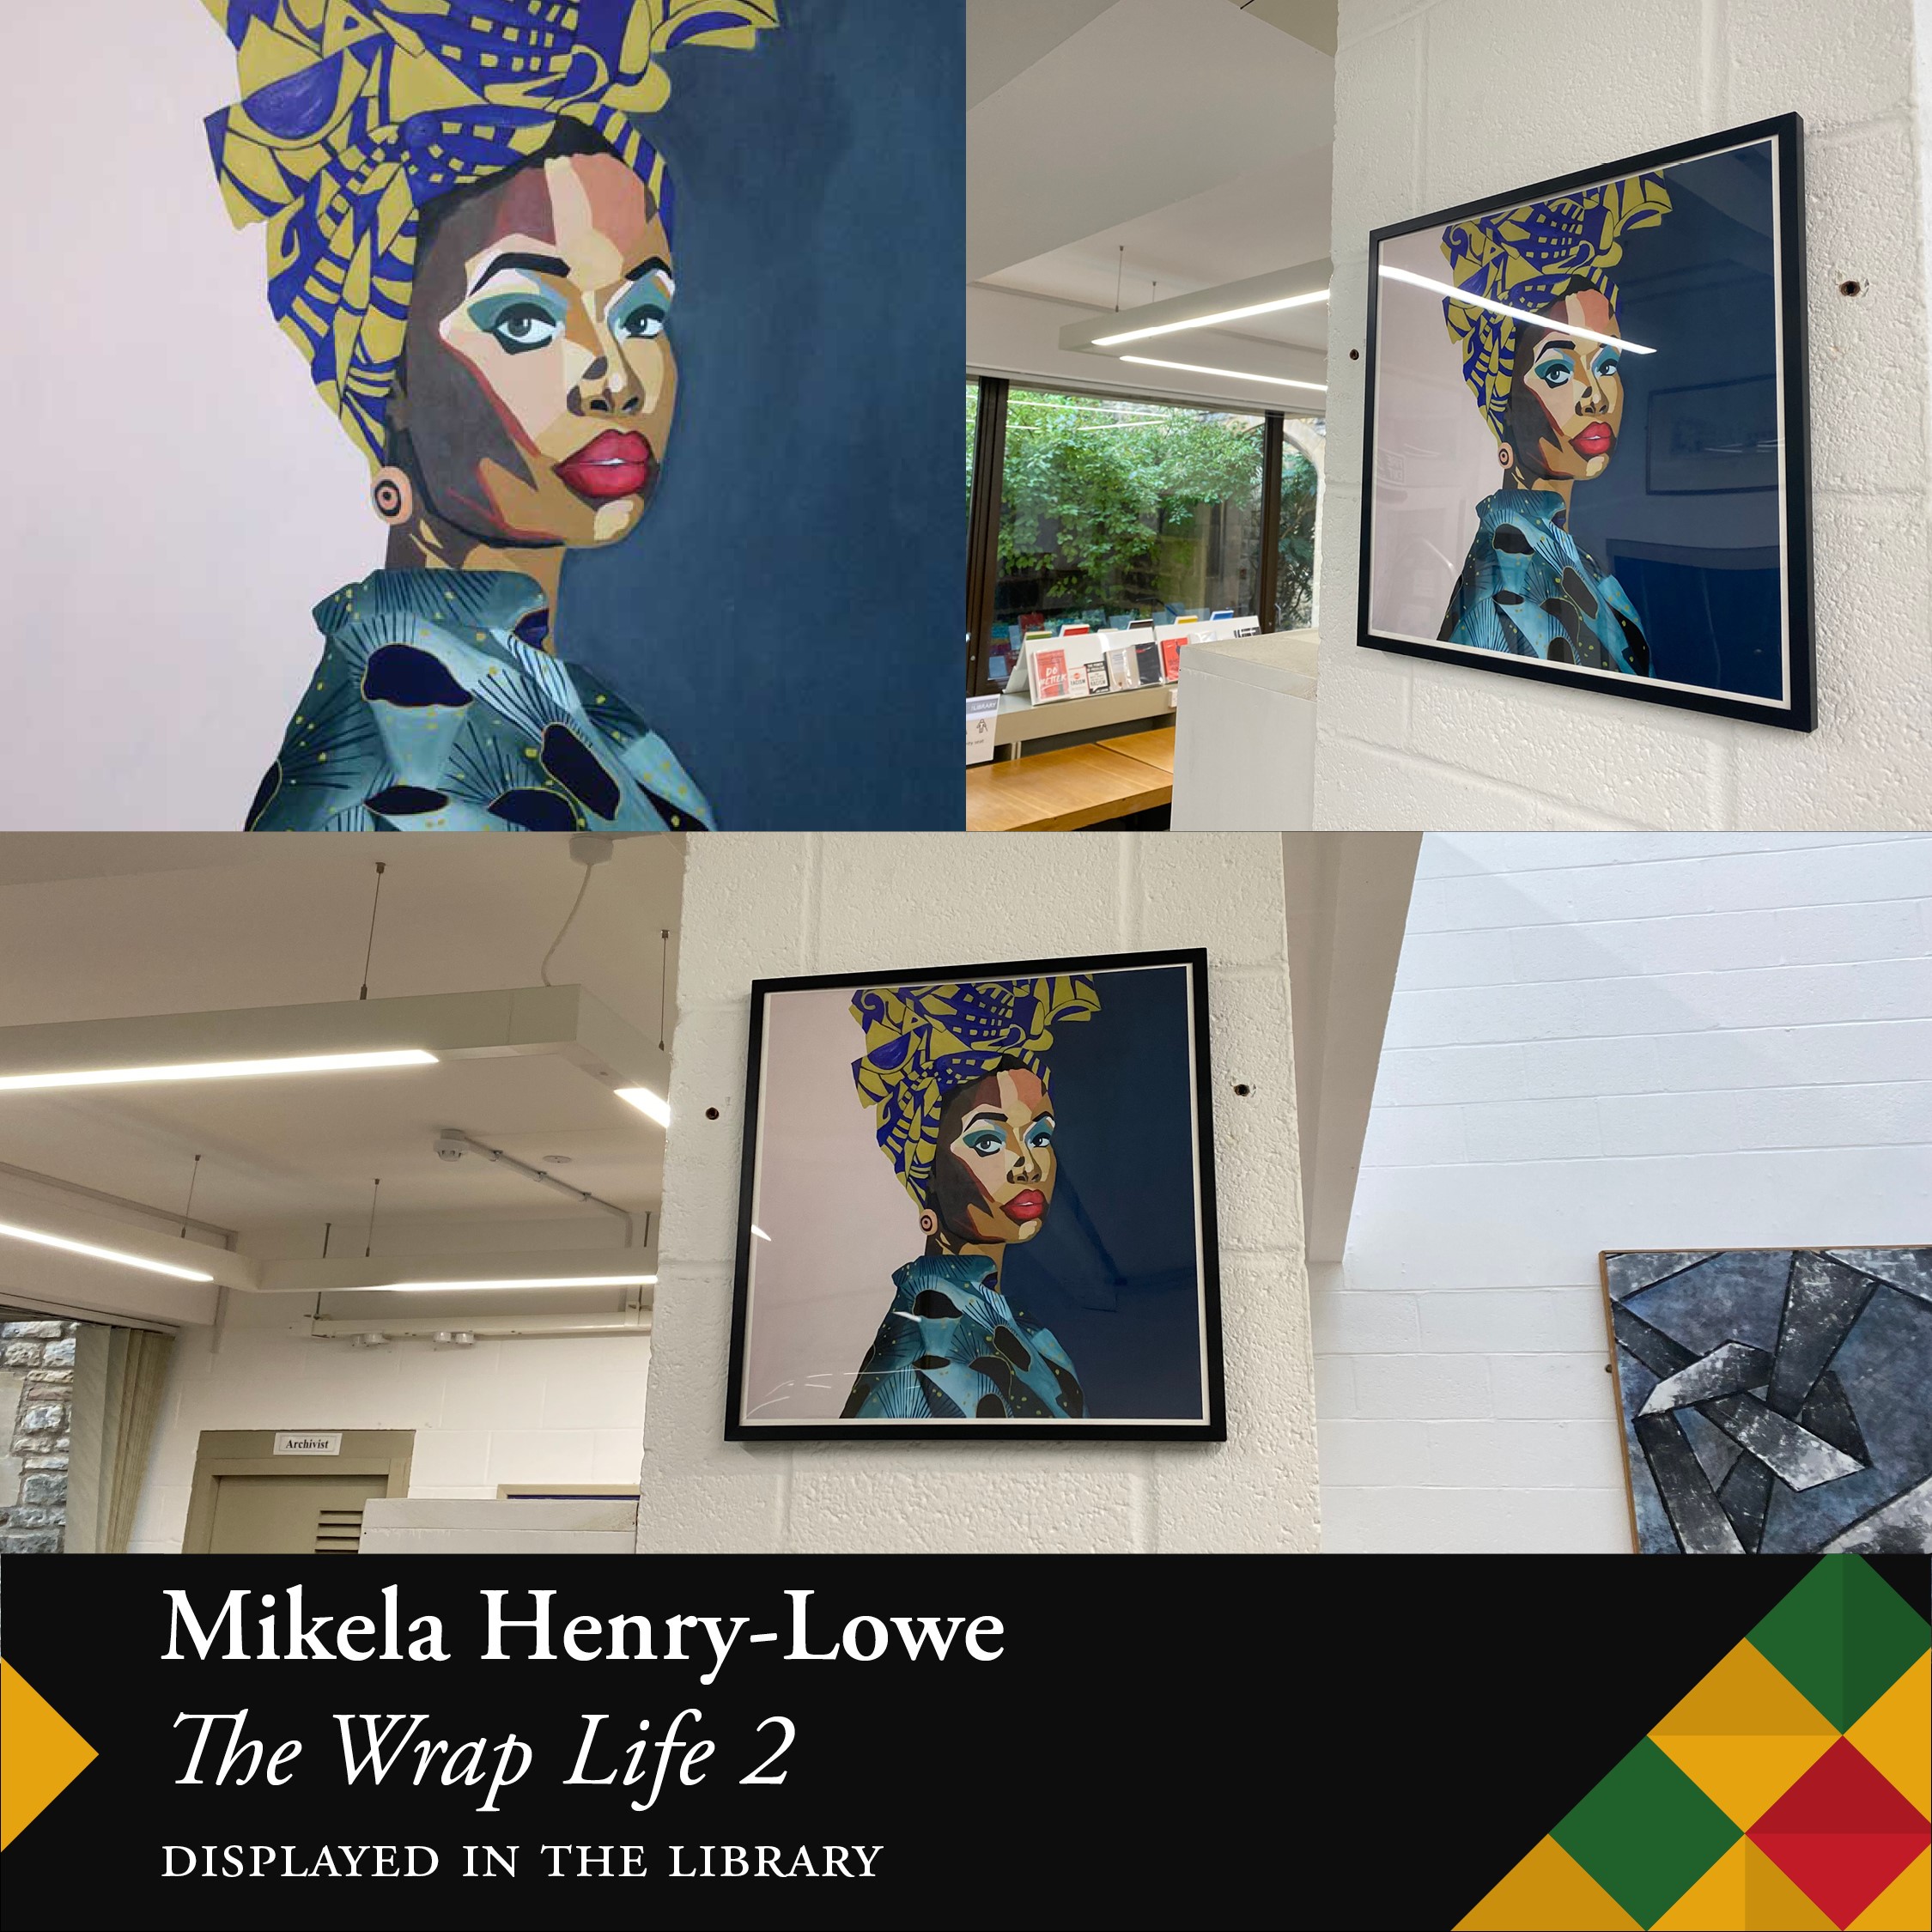 Mikela Henry-Lowe, The Wrap Life 2, 2016